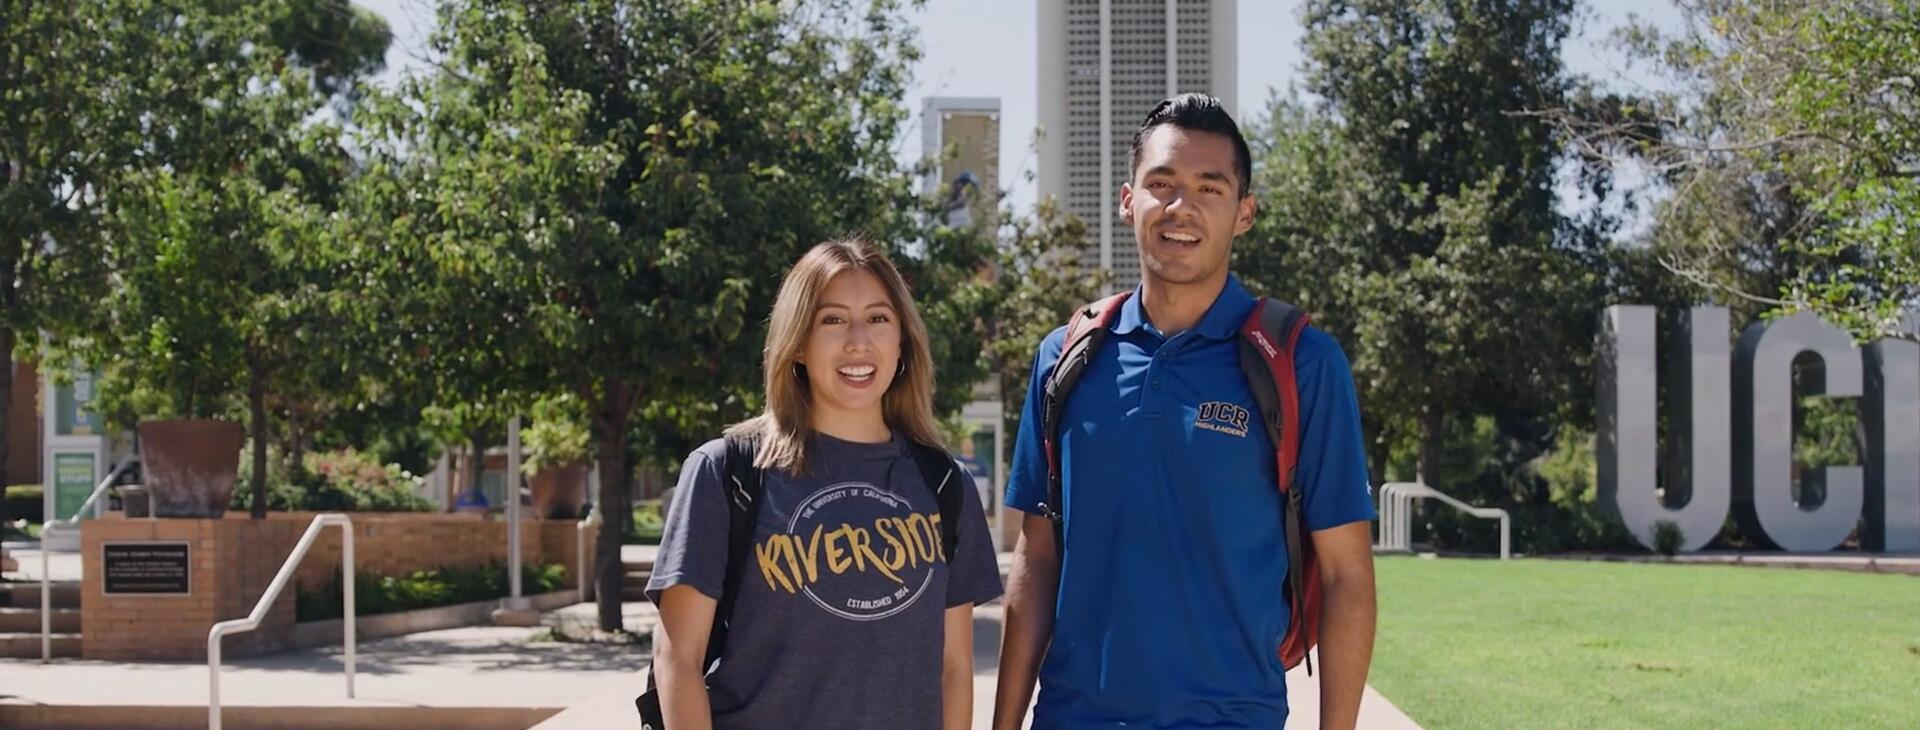 How to Apply: Follow along as UCR students walk you through the process of filling out an admission application.